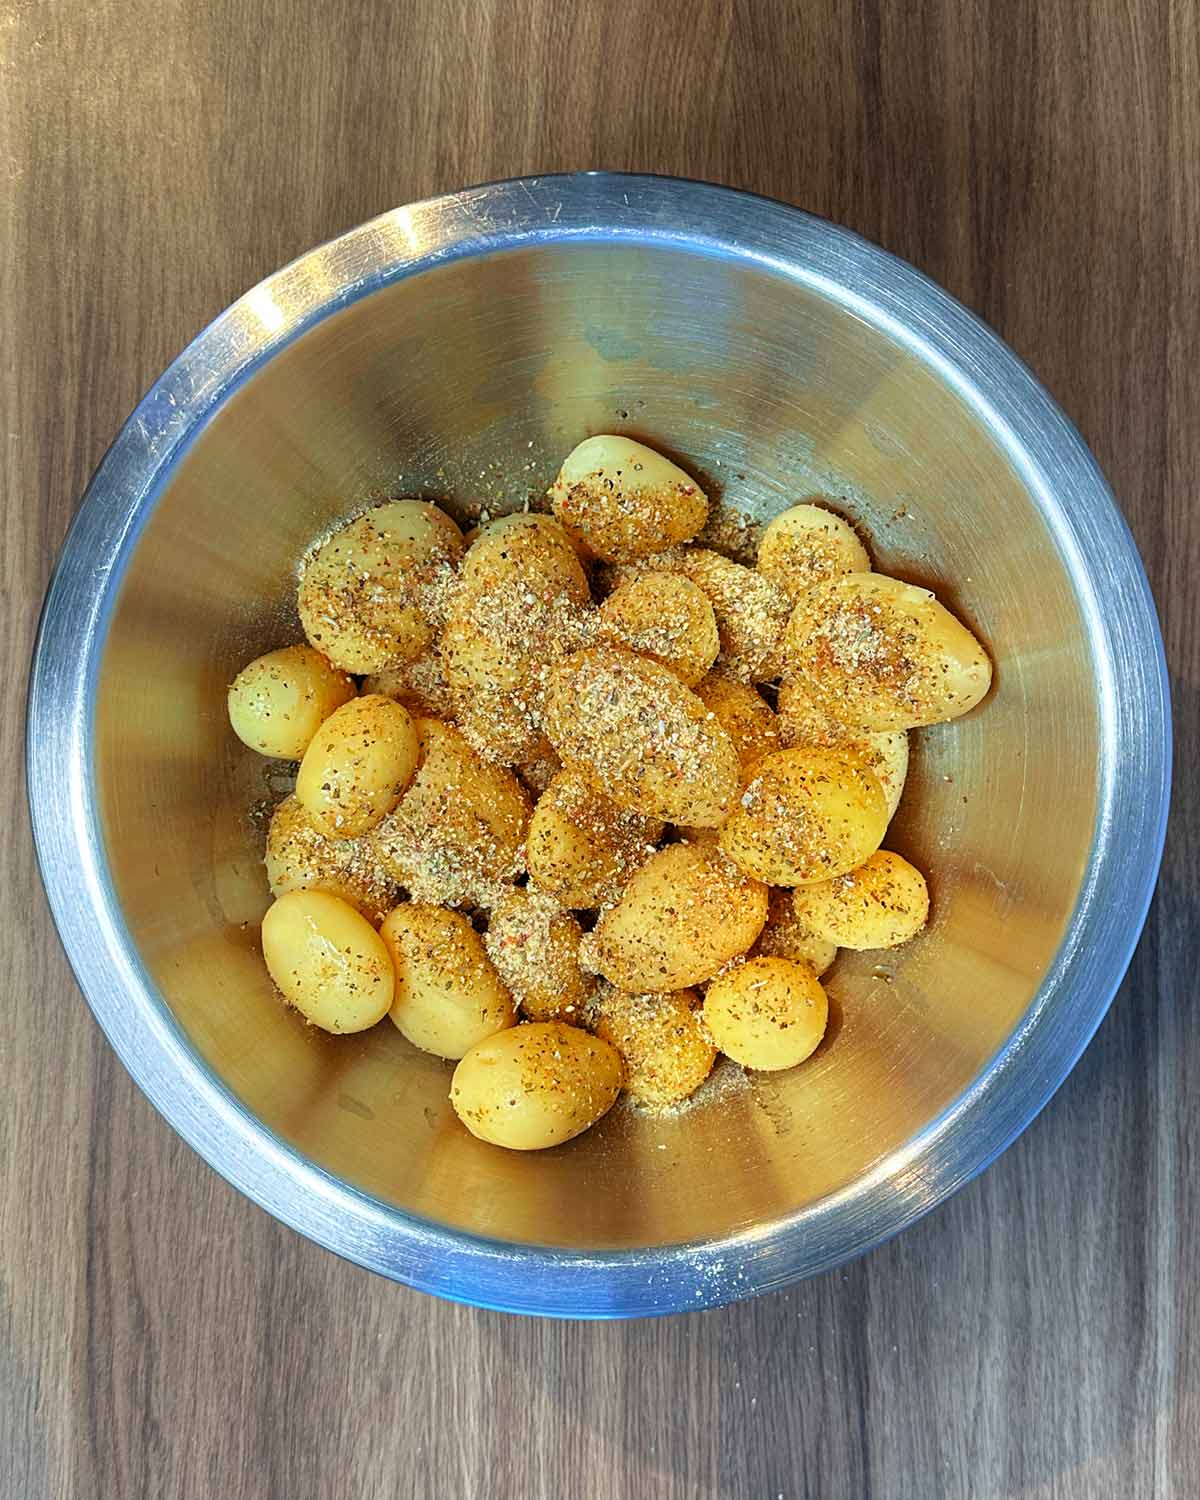 A bowl of new potatoes with oil and seasoning on them.